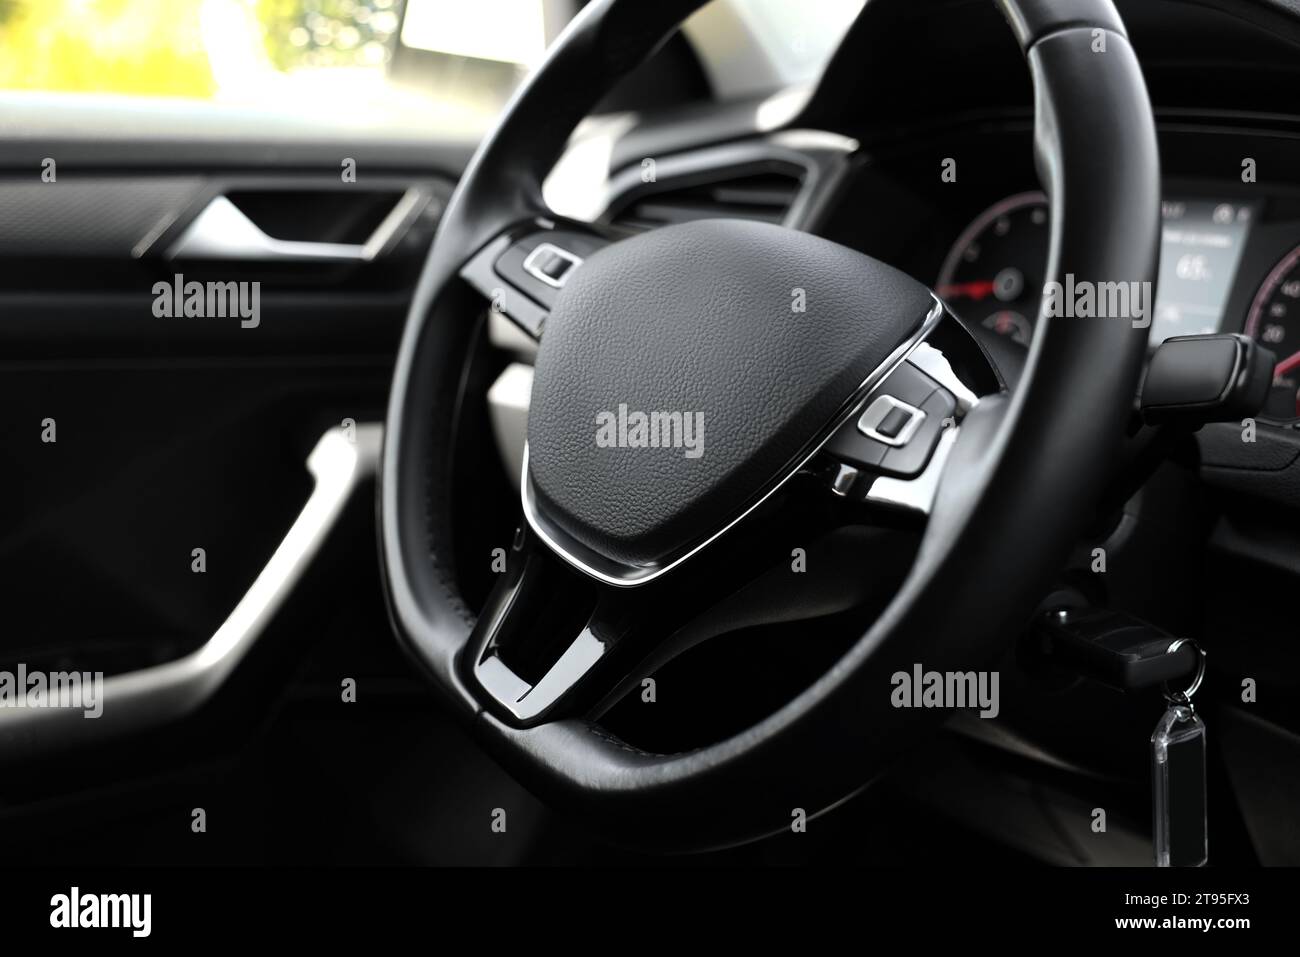 Safety airbag sign on steering wheel inside car Stock Photo